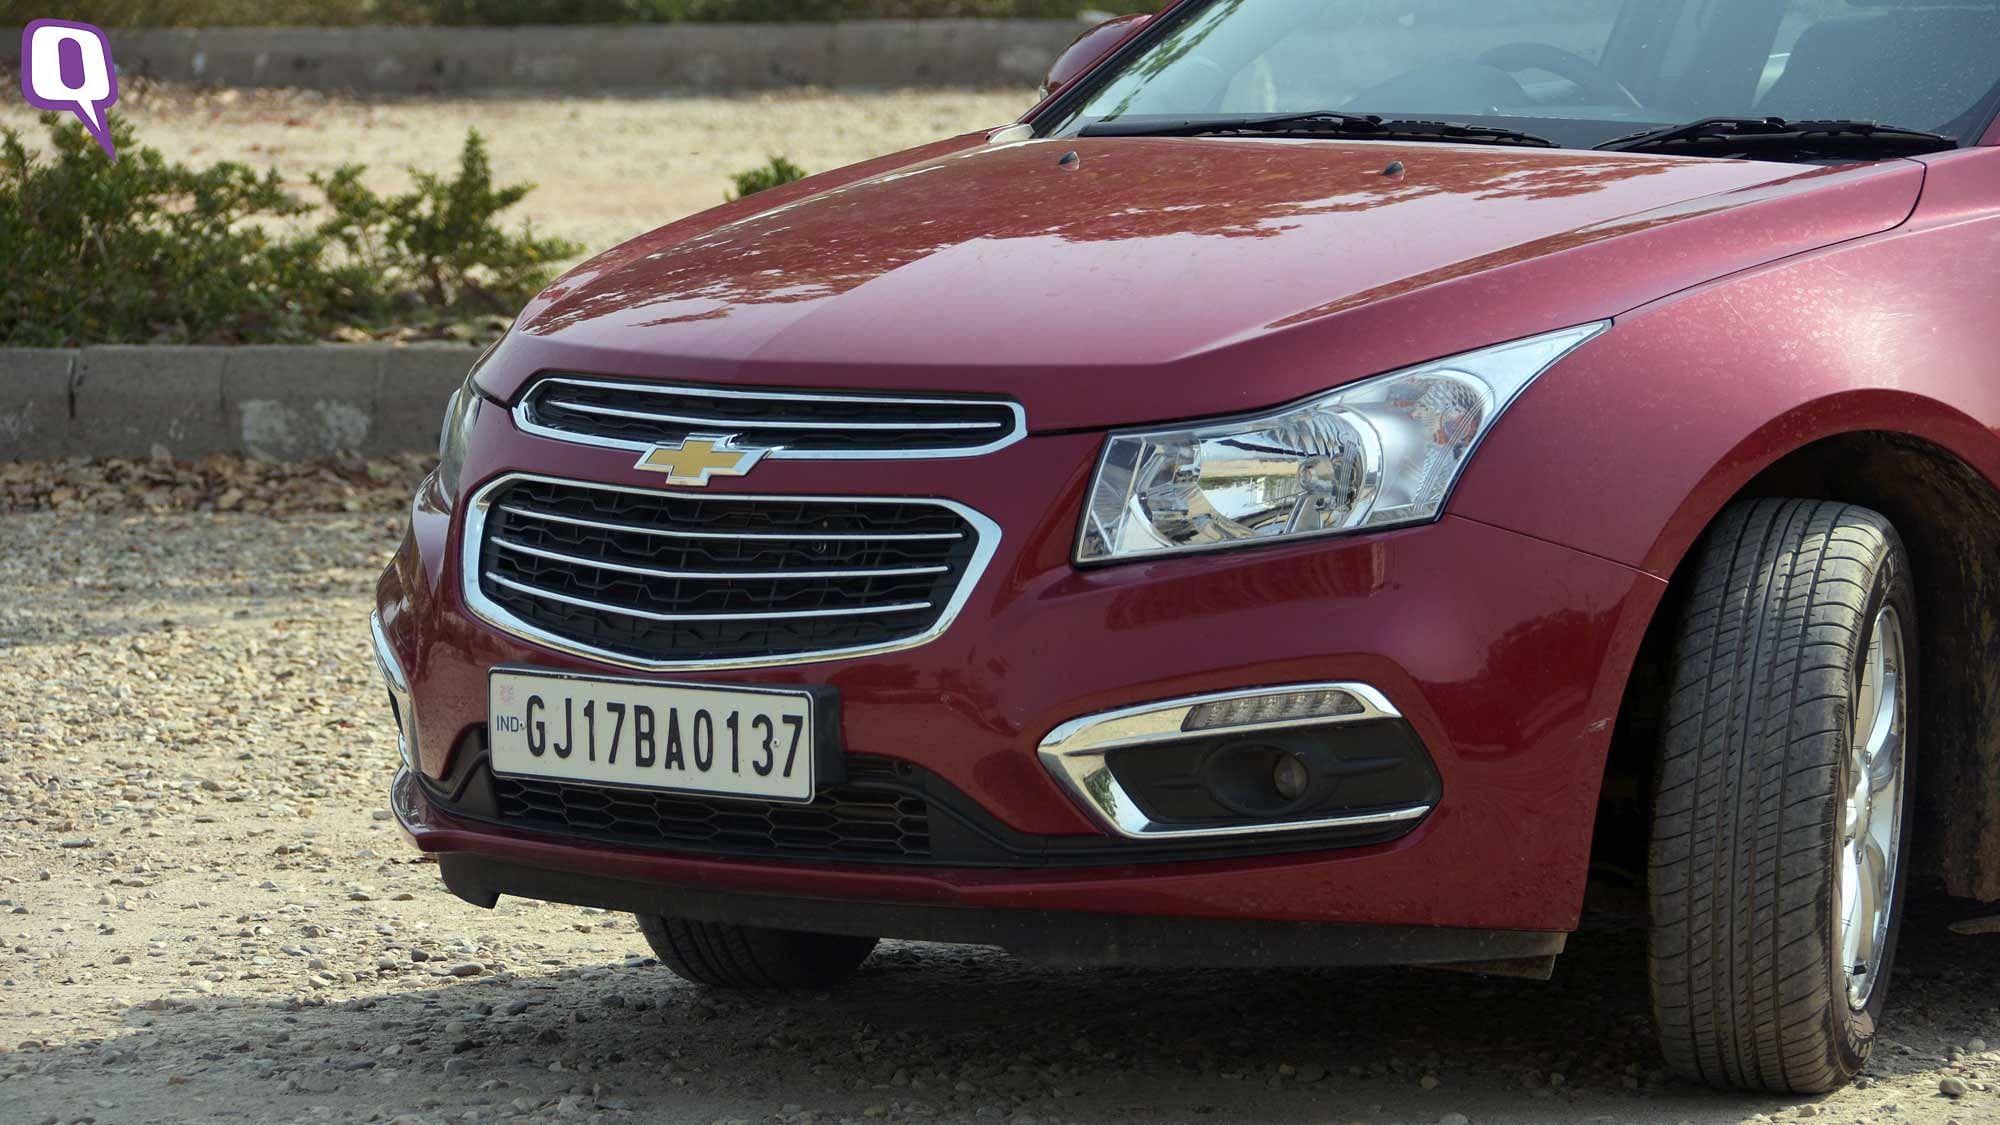 Facelifted Chevrolet Cruze Launched in India at Rs 14.68 Lakh